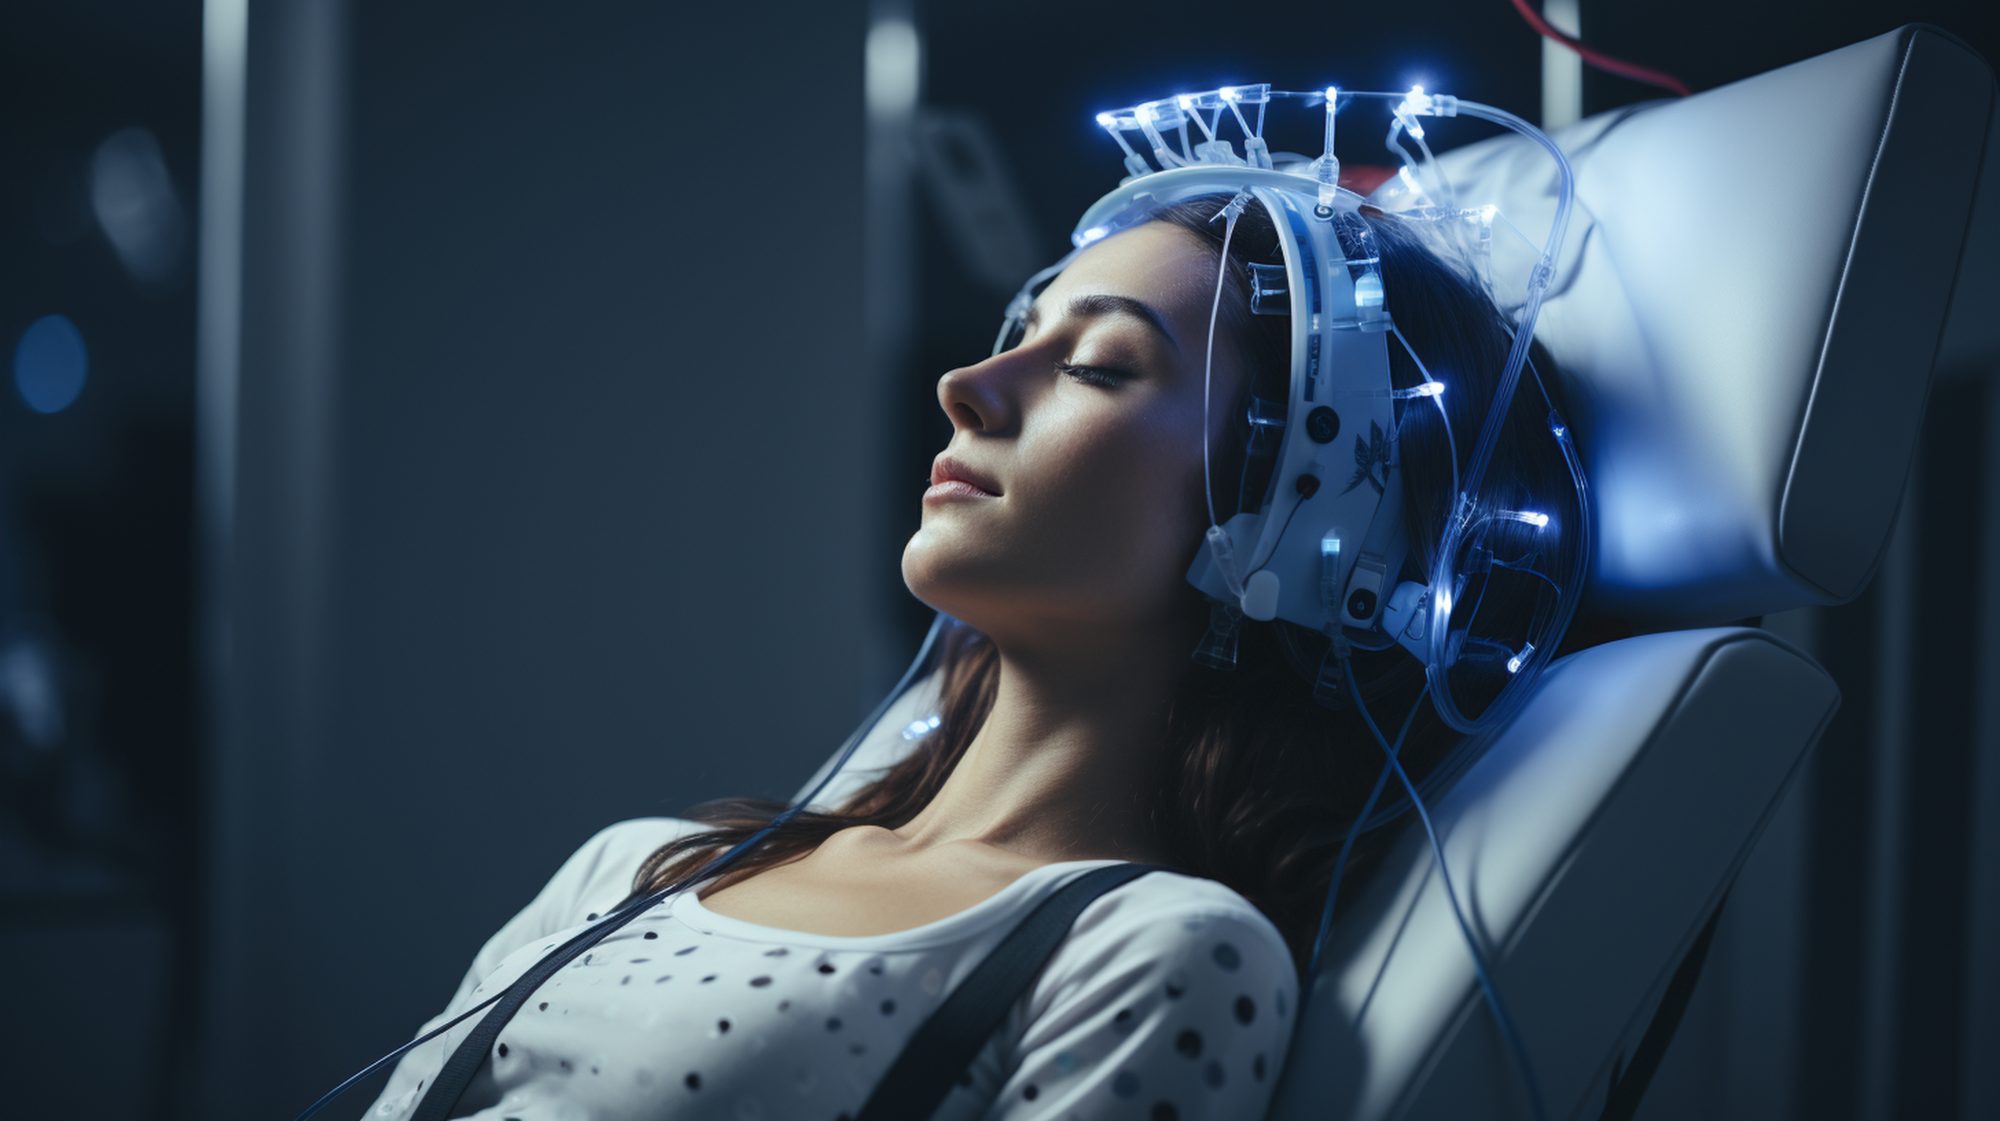 Benefits of TMS Therapy Possible in One Week, UCLA Health Study Finds